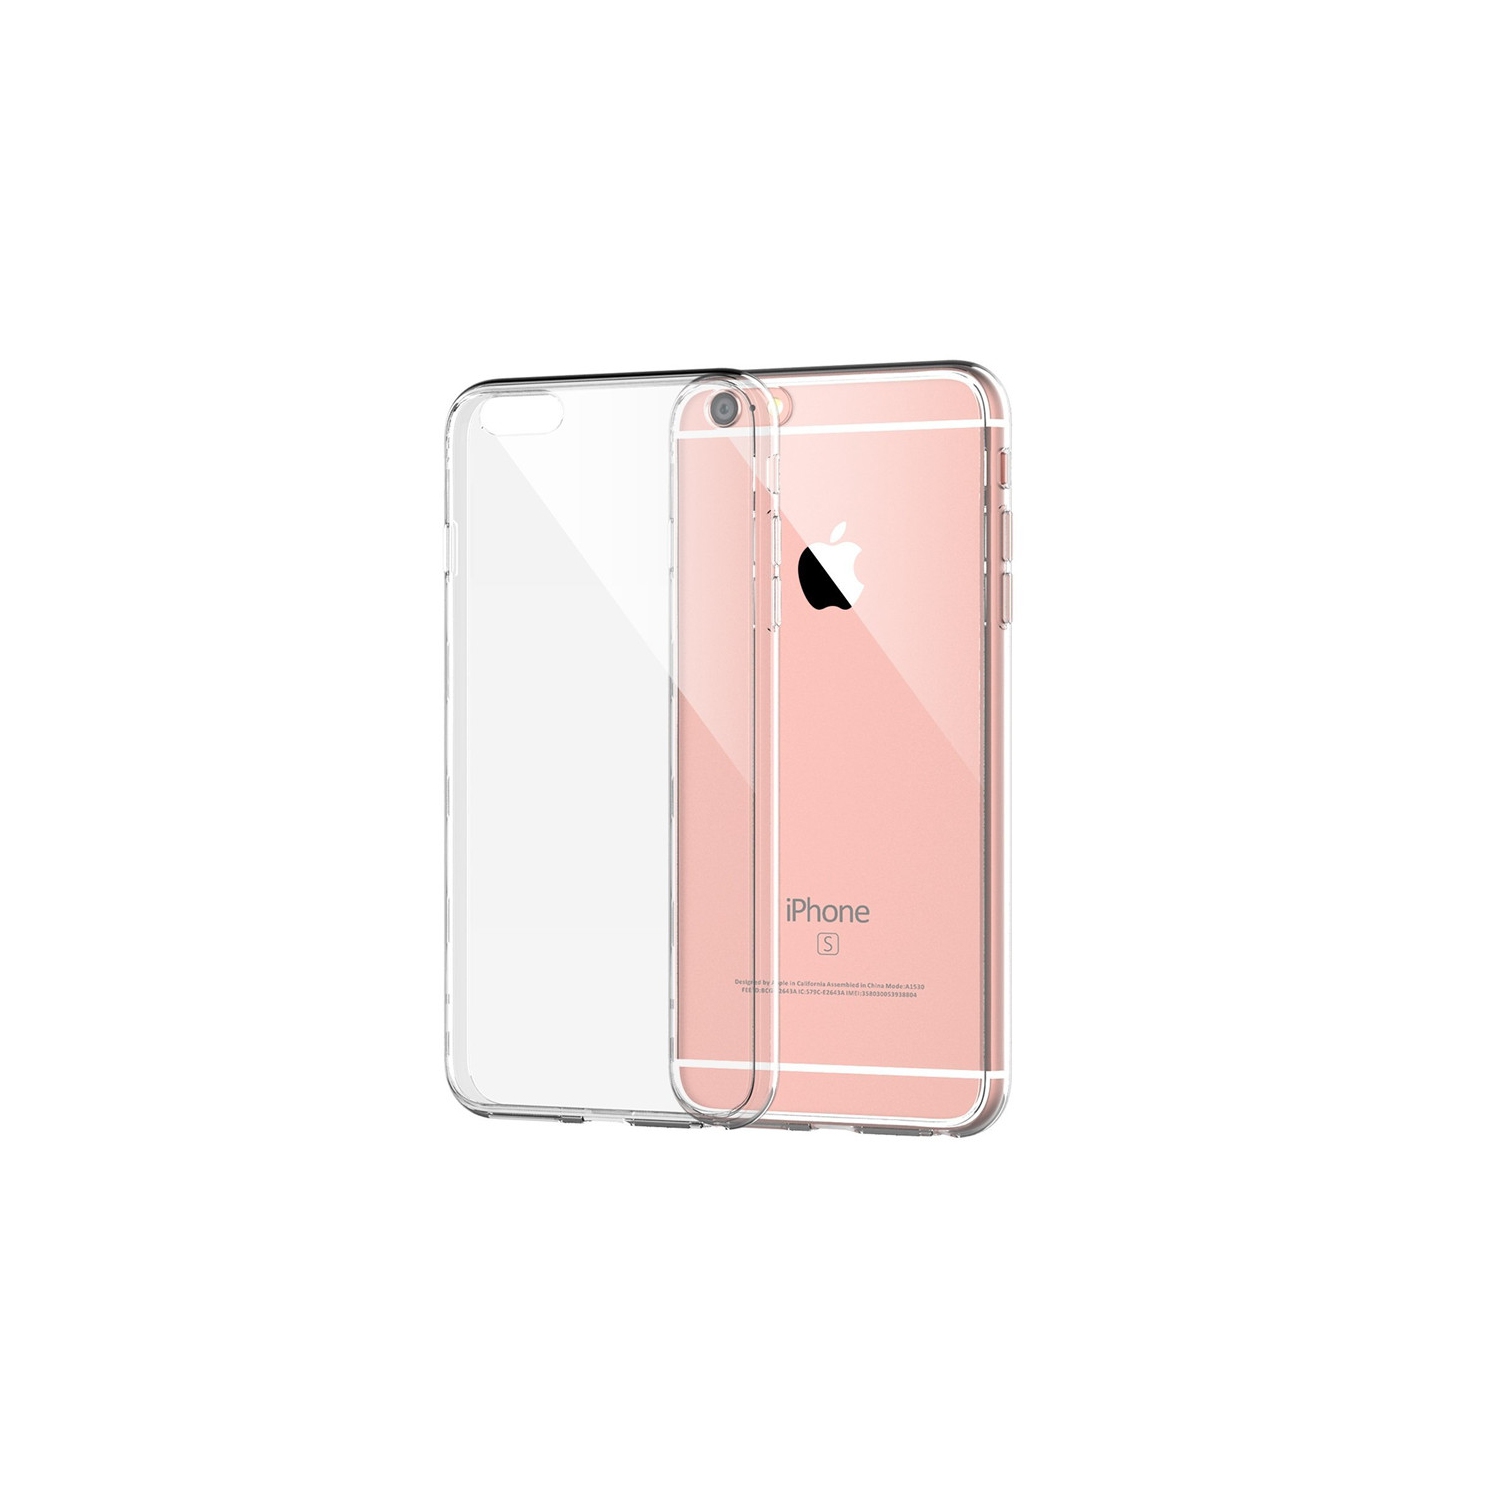 【CSmart】 Ultra Thin Soft TPU Silicone Jelly Bumper Back Cover Case for iPhone 6 Plus & 6S Plus (5.5"), Transparent Clear